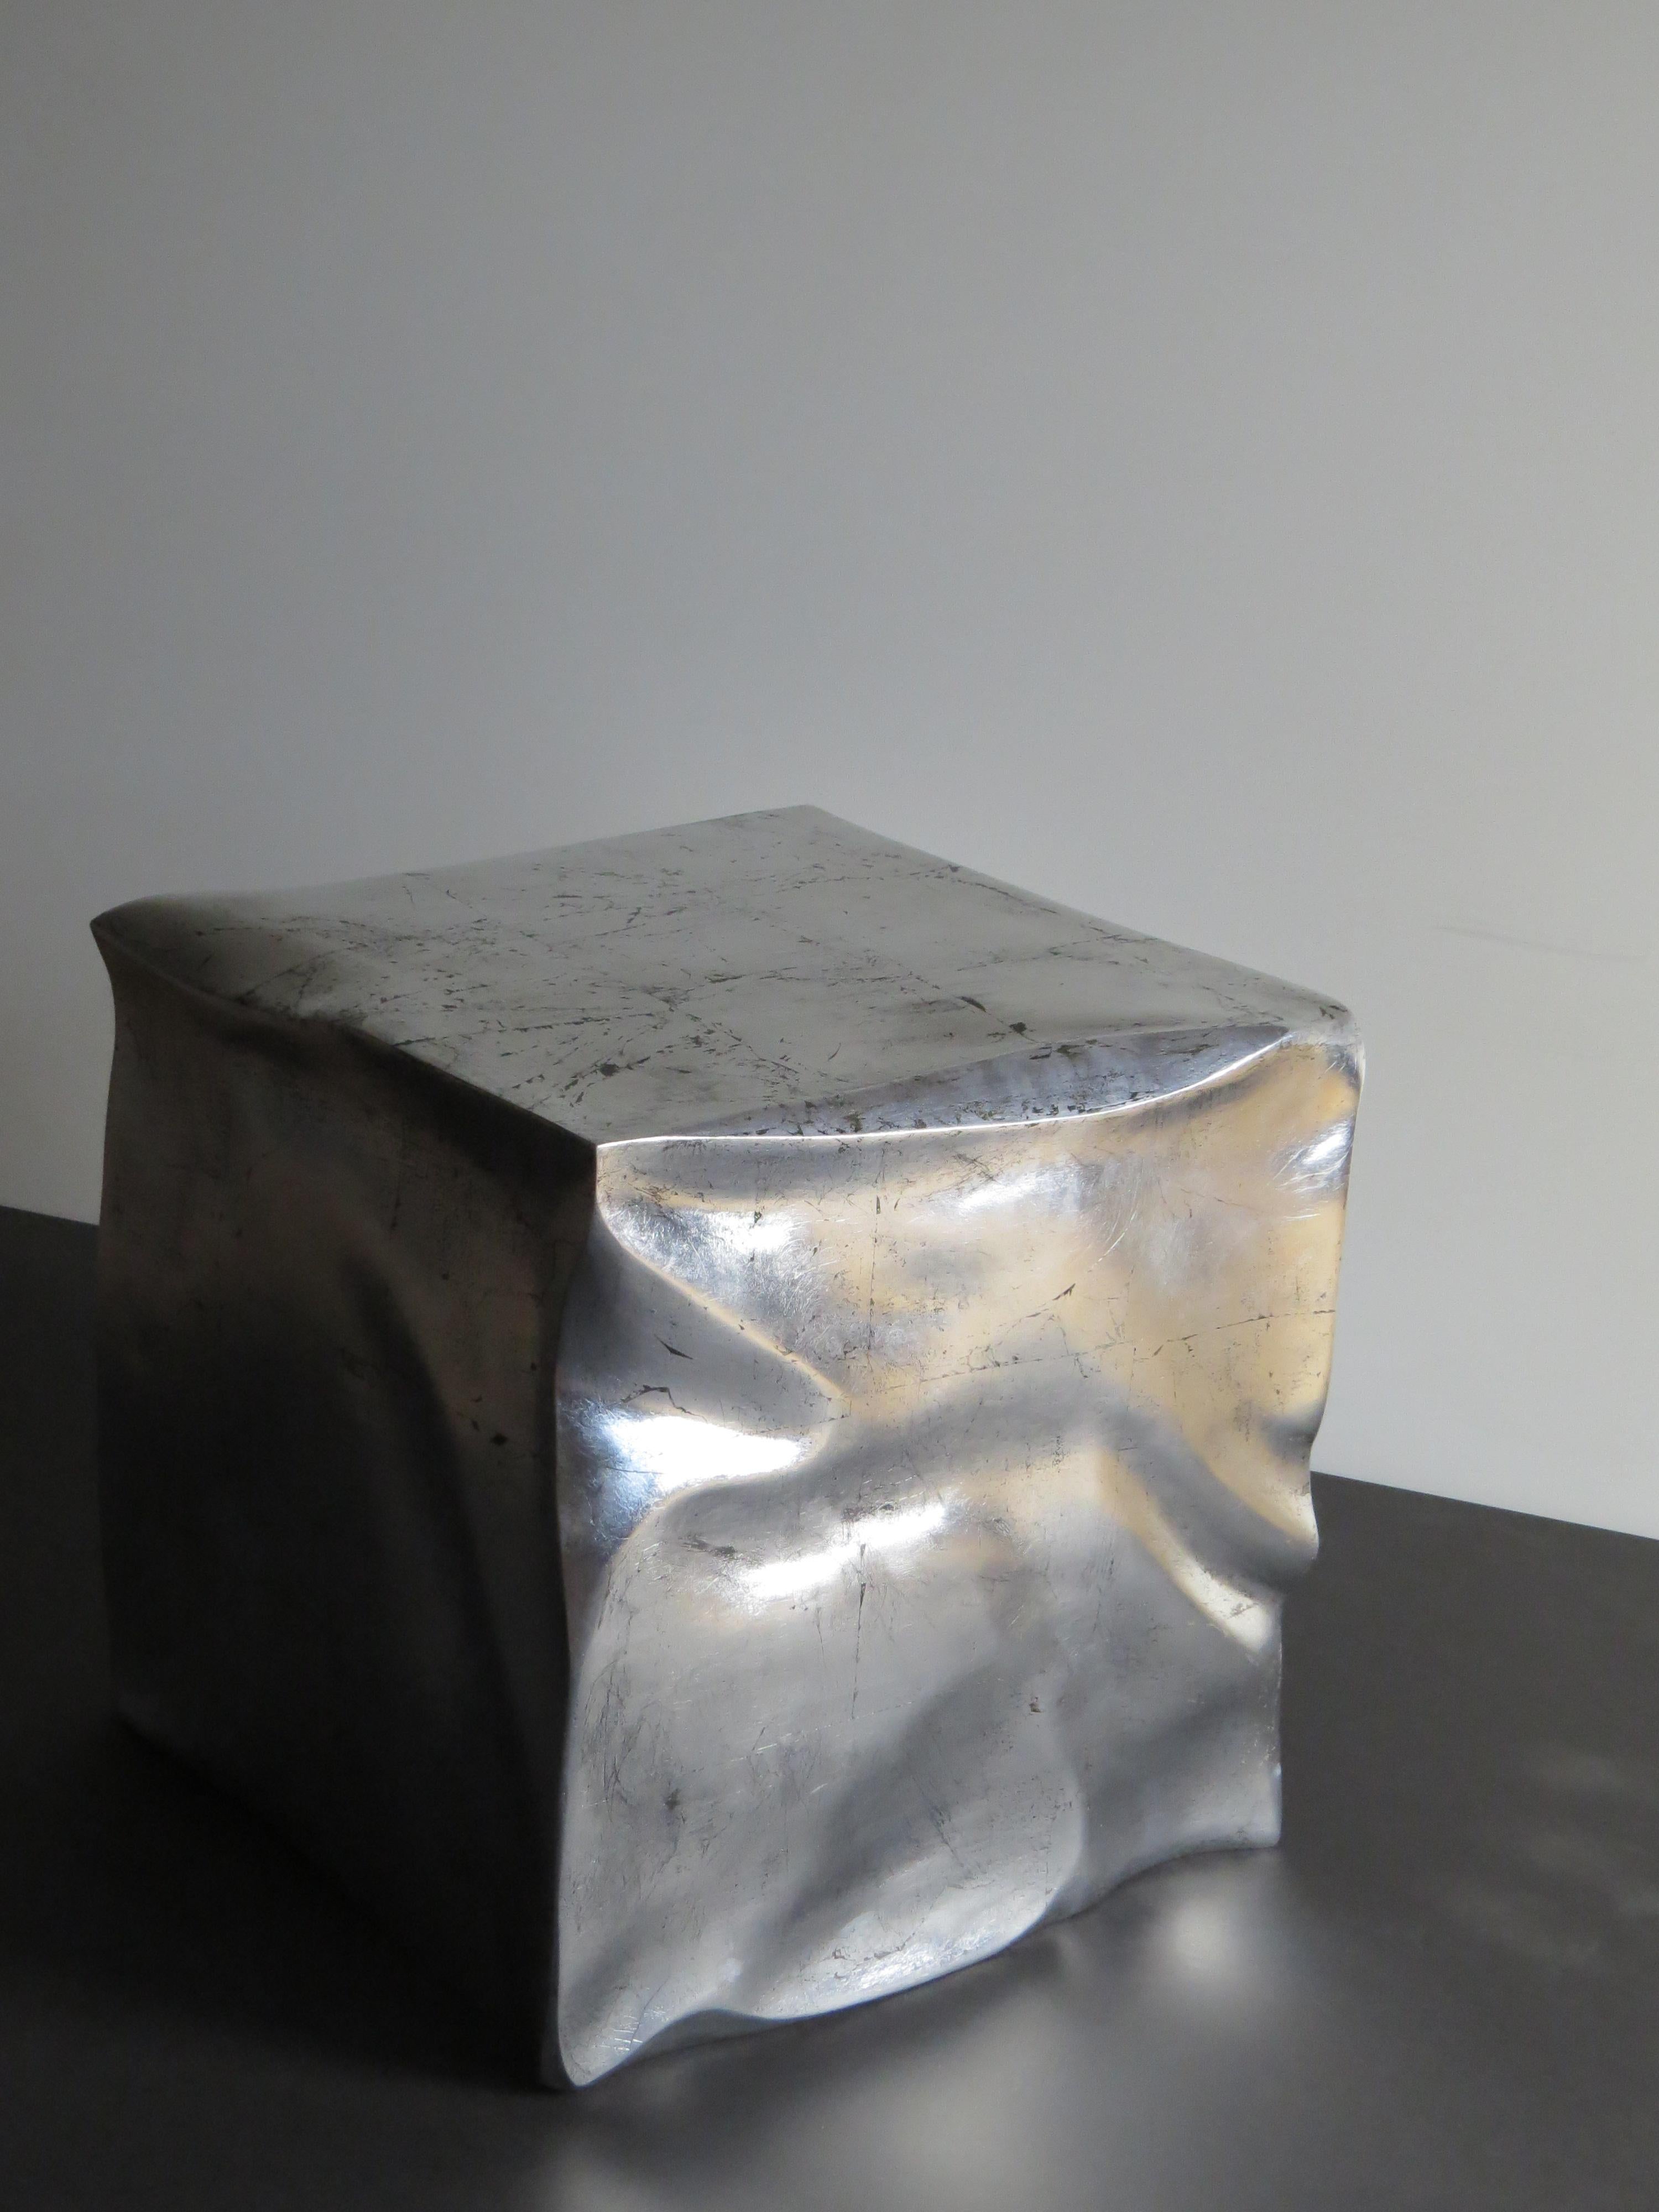 Handmade in organic design.
The cube is made of plywood, which is sculpted. The wrinkles and kinks are worked out - each cube is unique, the deformations are always different.
The surface is then silver plated and aged with impact metal.
An